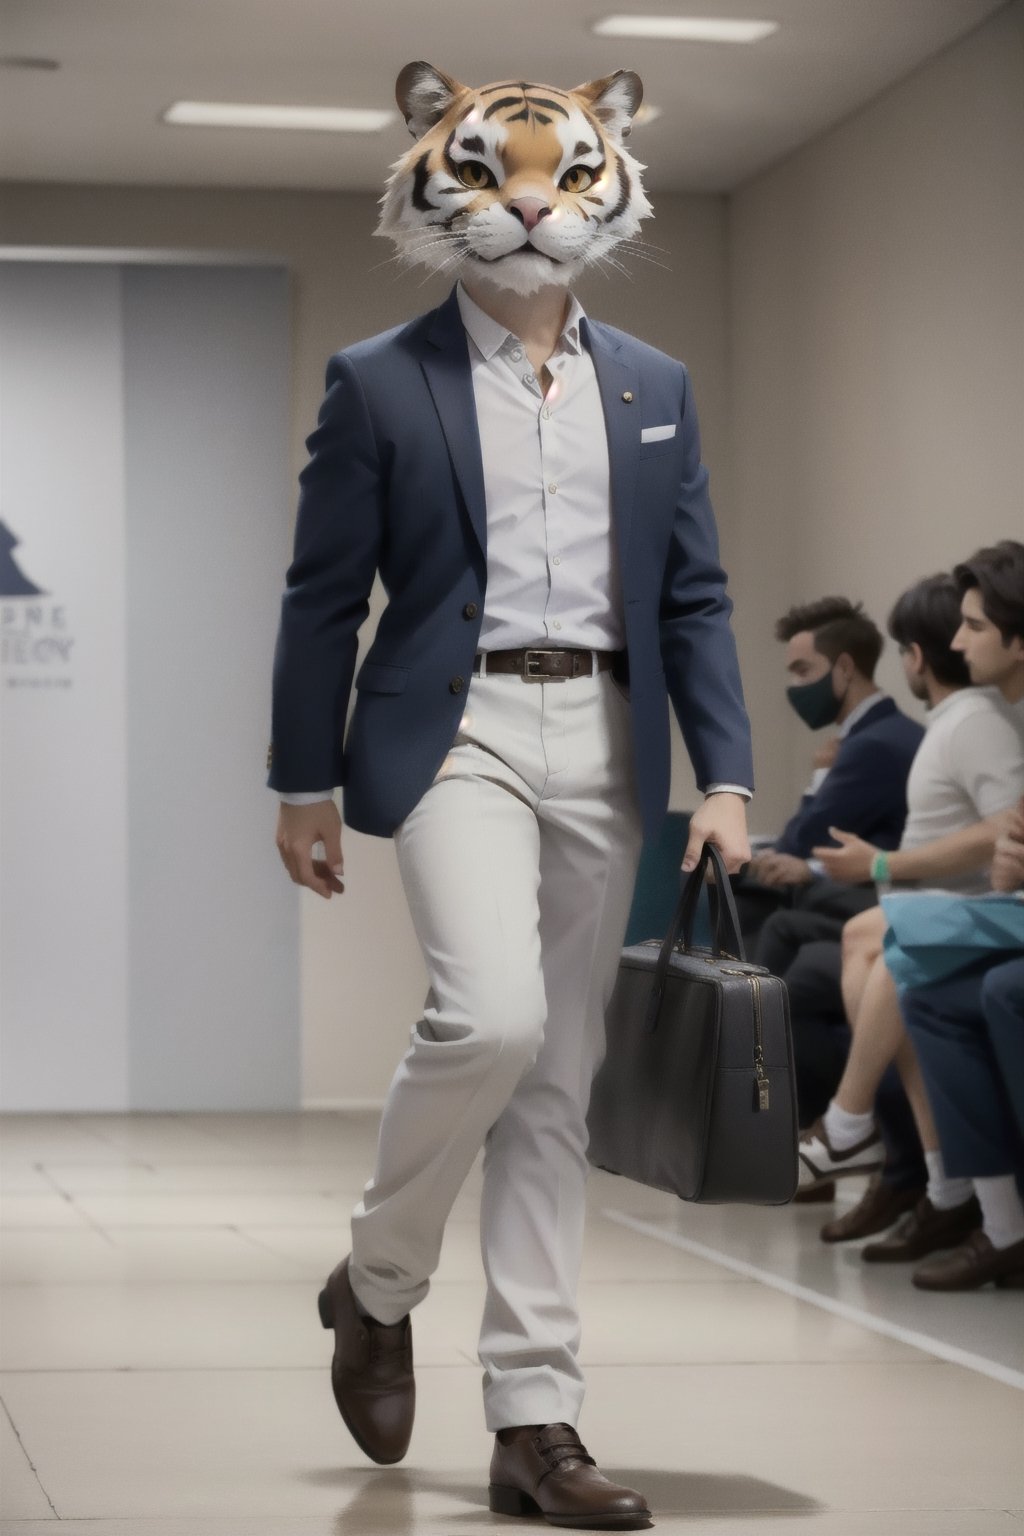 A anthropomorphic tiger, dignified and majestic,walking on the runway in a fashion show, wearing a  fashion suit and leather shoes, with a white shirt, a black and handbag. A full body shot of the cat from the front view, in the style of anime. The rendering was done with Unreal Engine at best quality.